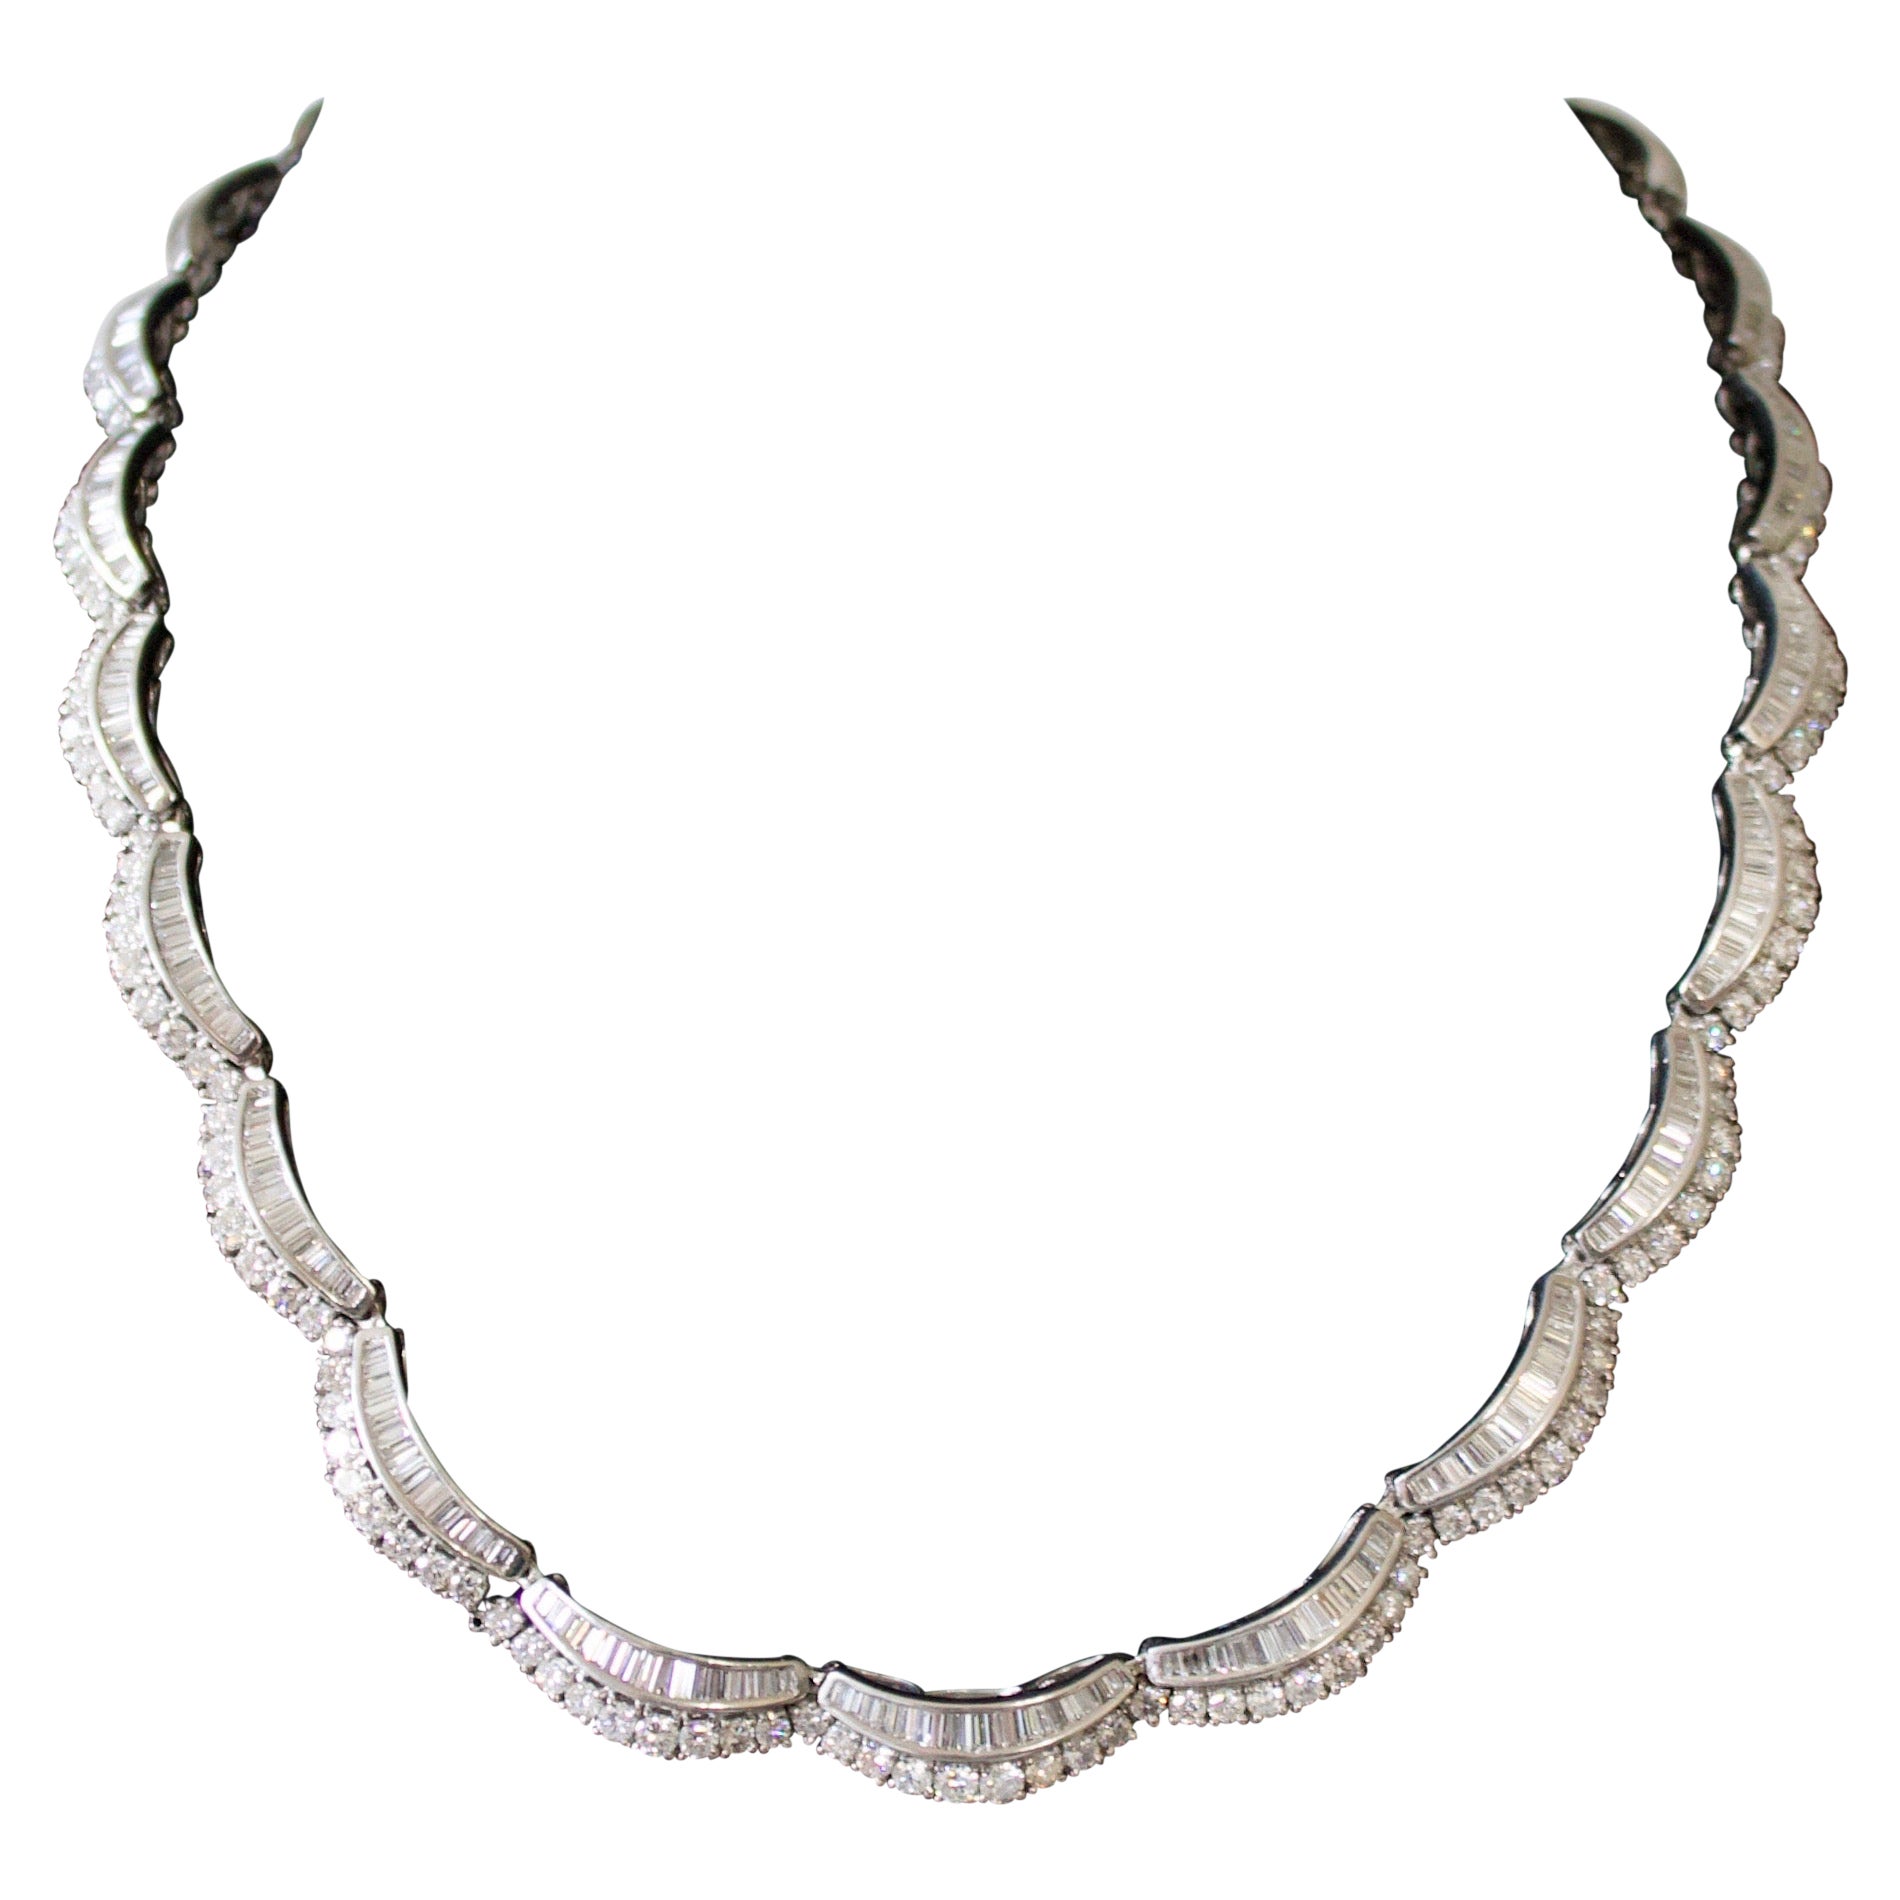 Important Diamond Necklace in 18k Gold 16.13 Carats